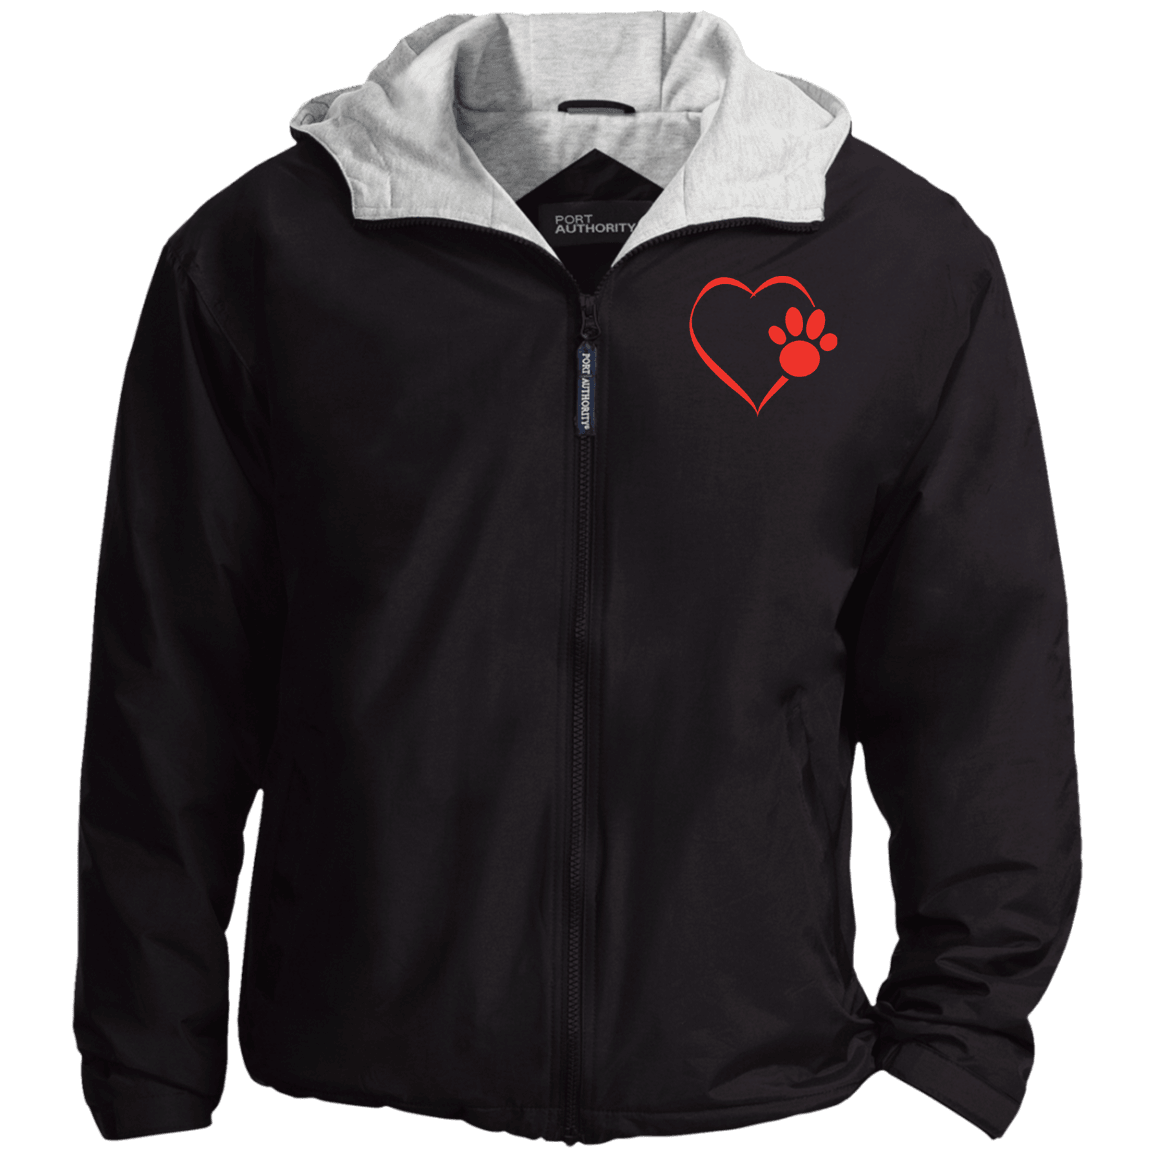 Designs by MyUtopia Shout Out:Heart Dog Paw Embroidered Port Authority Team Jacket,Black/Light Oxford / X-Small,Jackets